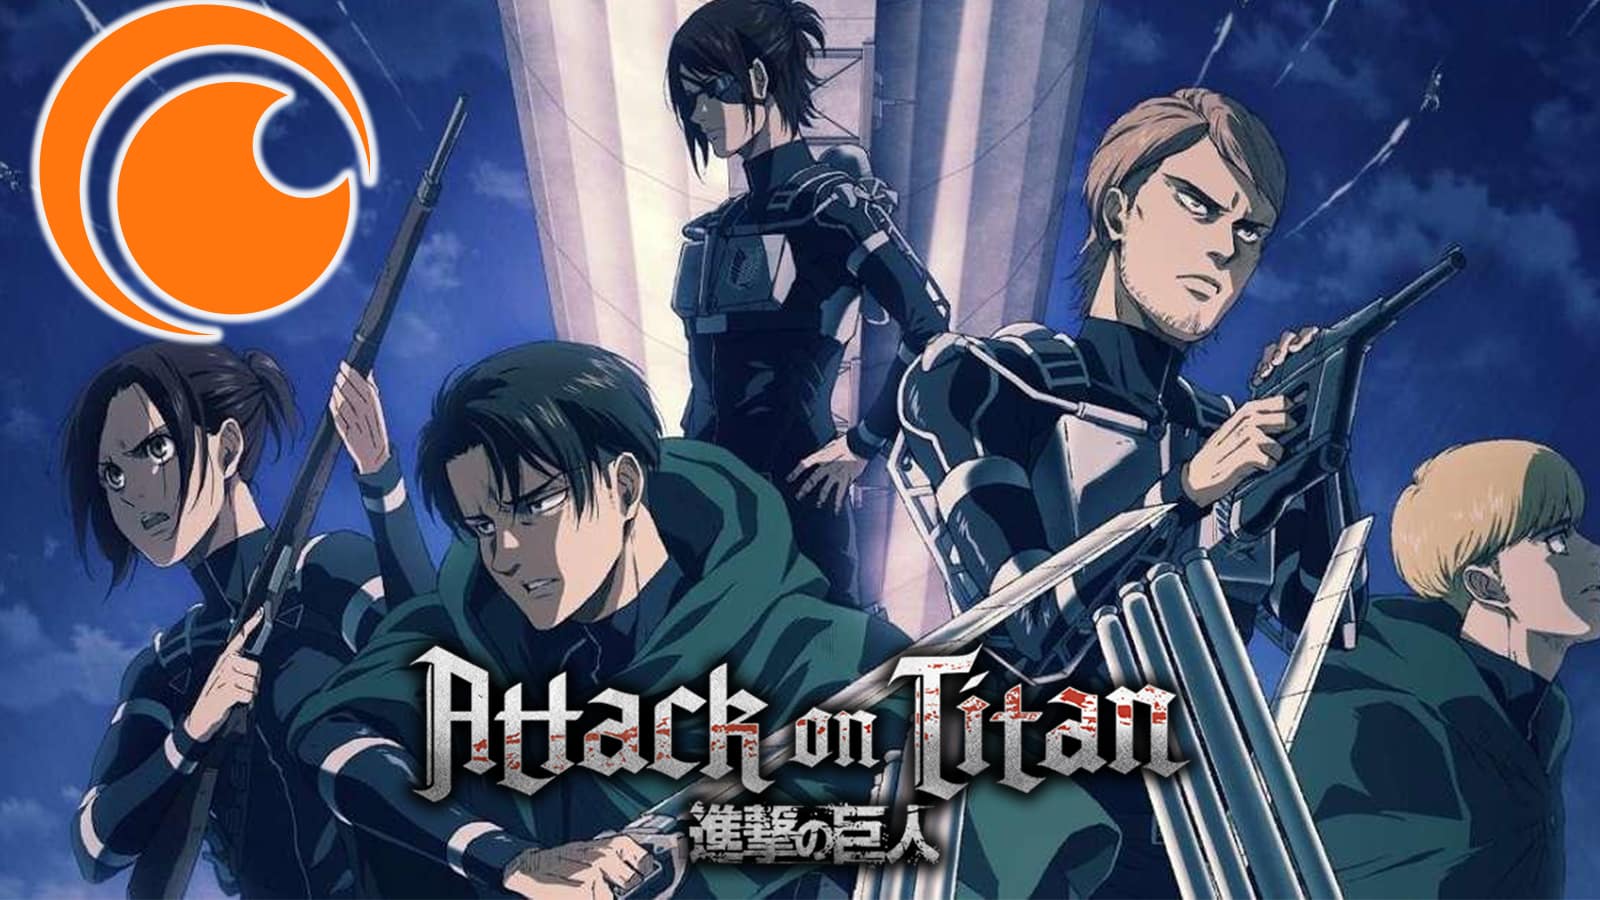 Crunchyroll subscriptions surge after attack on titan final season airs